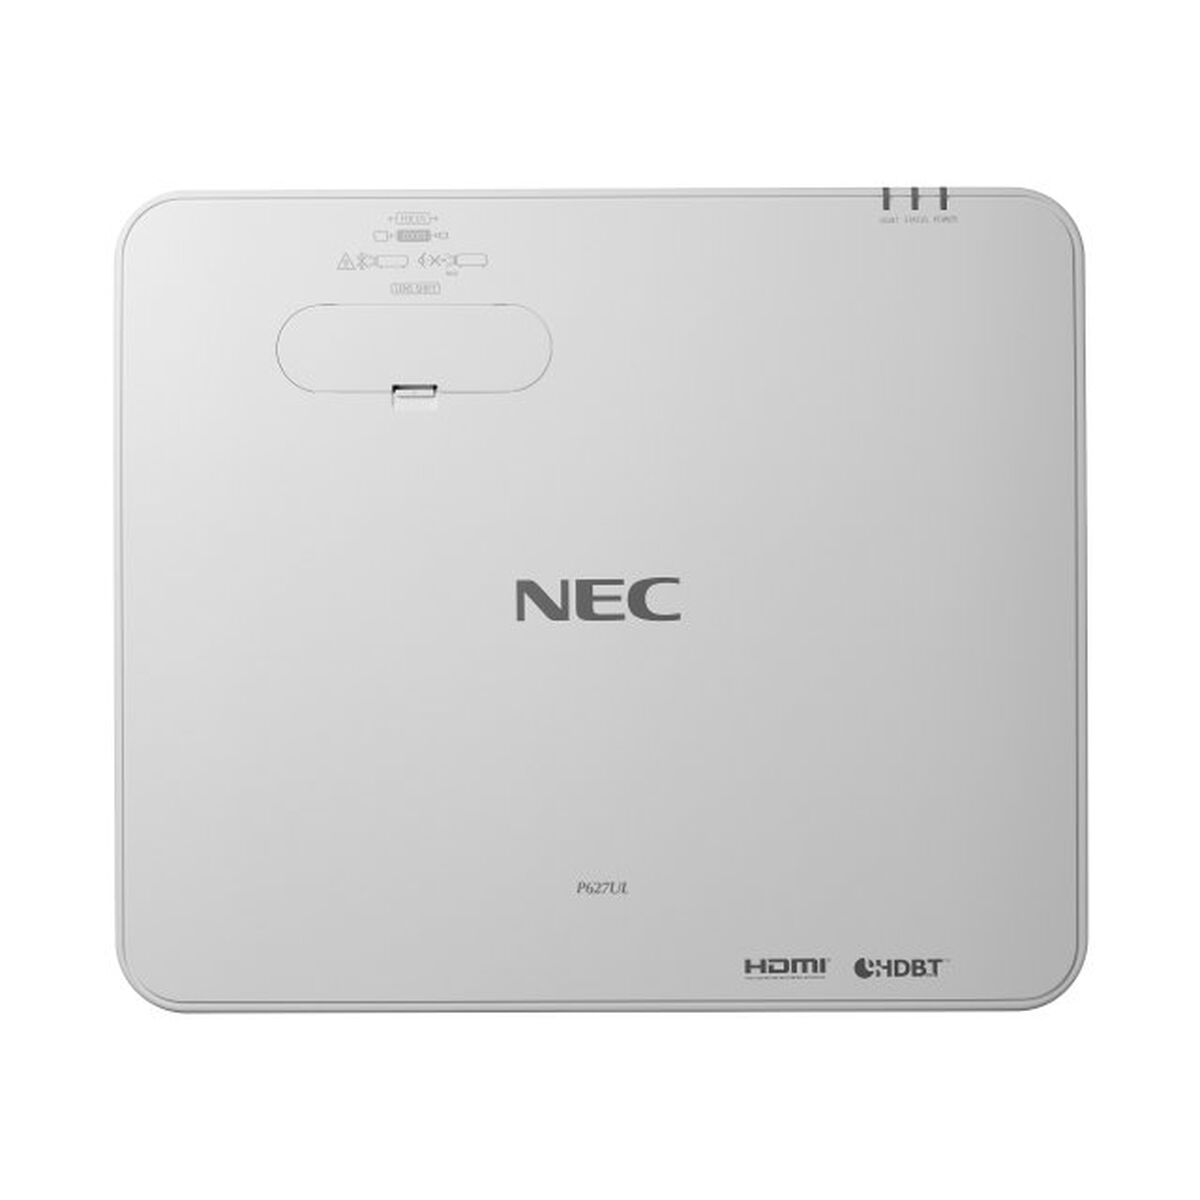 Projector NEC P627UL 6200 Lm, NEC, Electronics, TV, Video and home cinema, projector-nec-p627ul-6200-lm, Brand_NEC, category-reference-2609, category-reference-2642, category-reference-2947, category-reference-t-18805, category-reference-t-19653, cinema and television, computers / peripherals, Condition_NEW, entertainment, office, Price_+ 1000, RiotNook